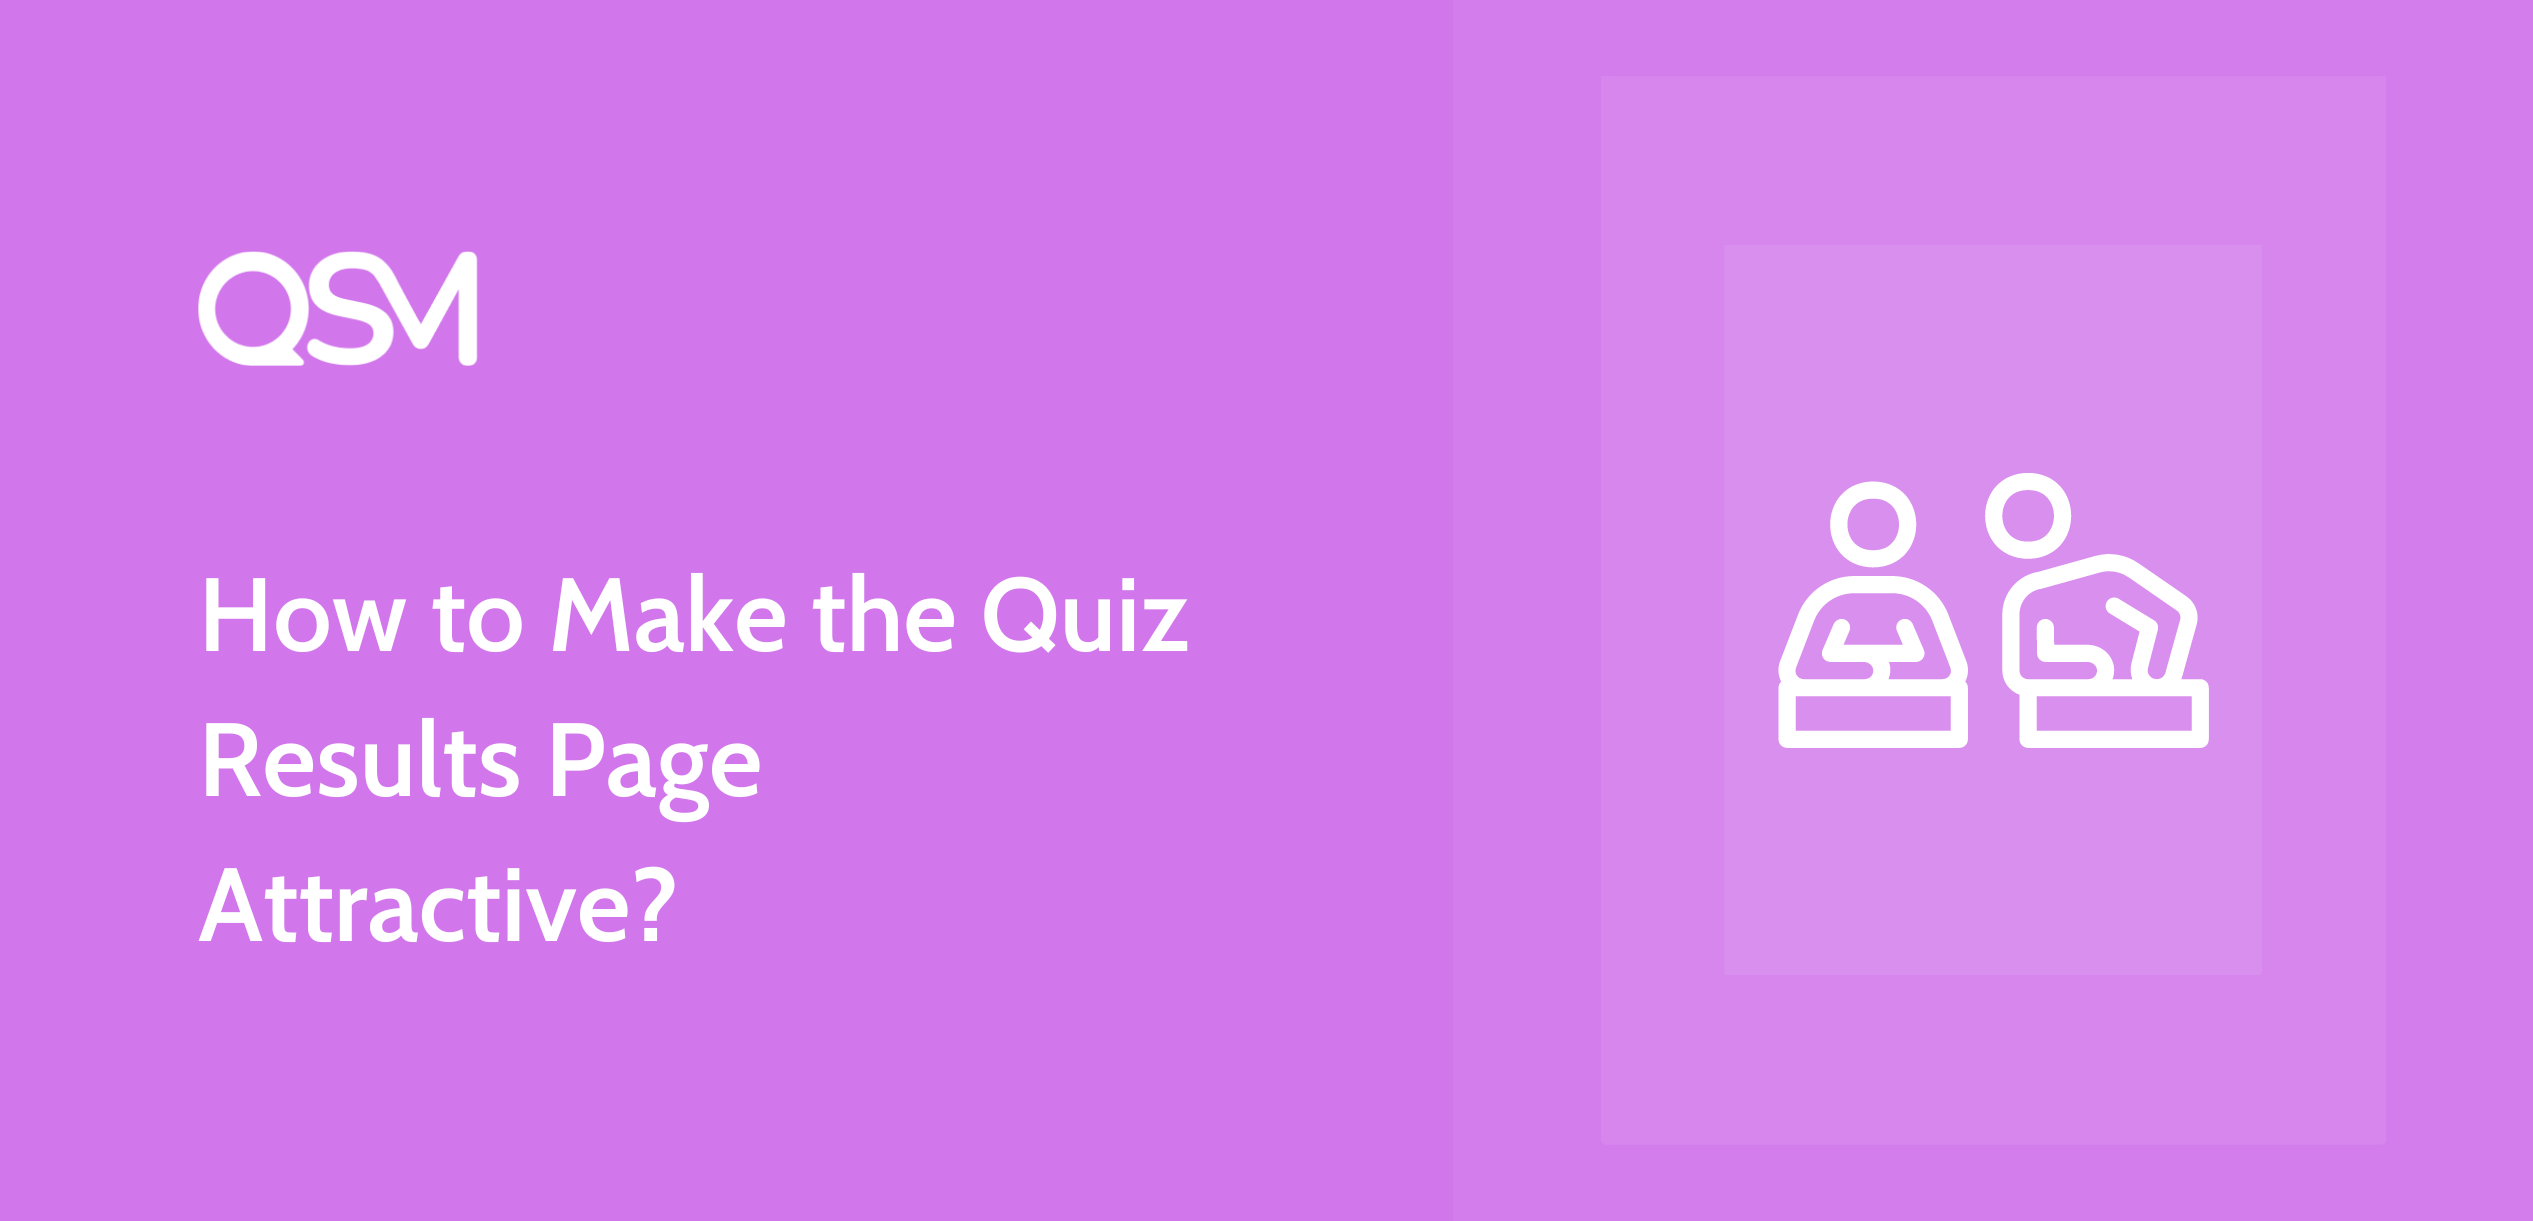 How to Make the Quiz Results Page Attractive?